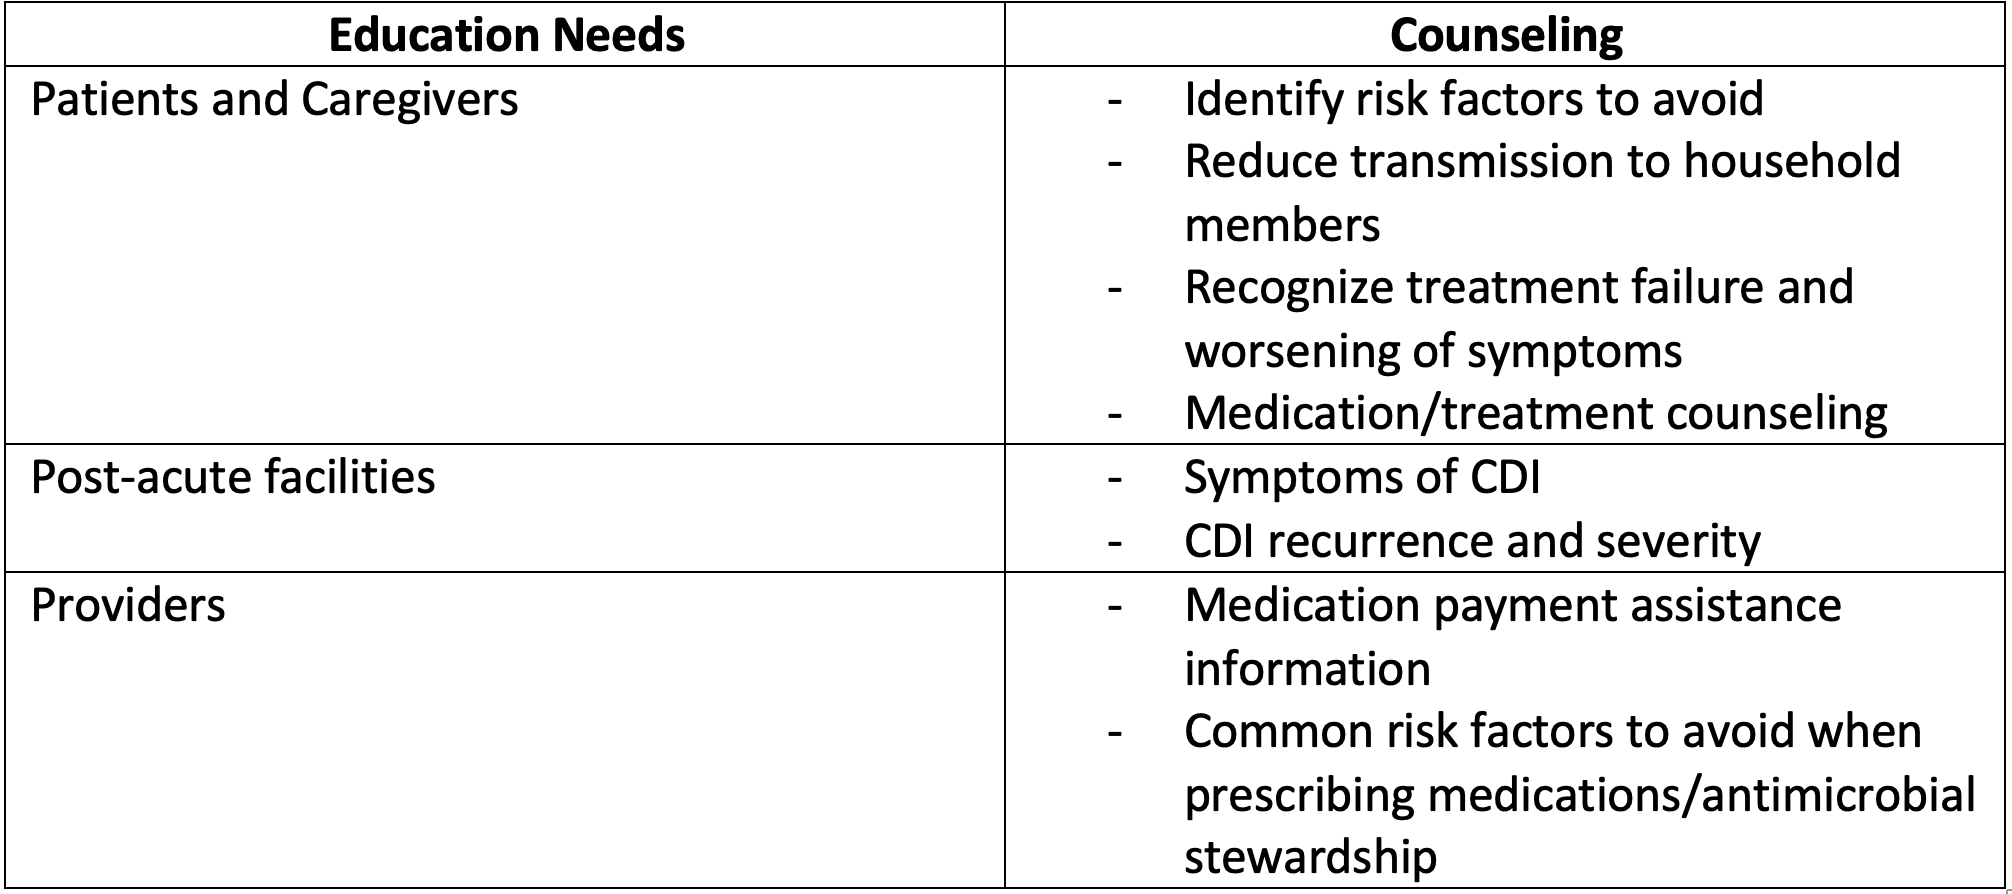 Table 2: Pharmacist Counseling Opportunities